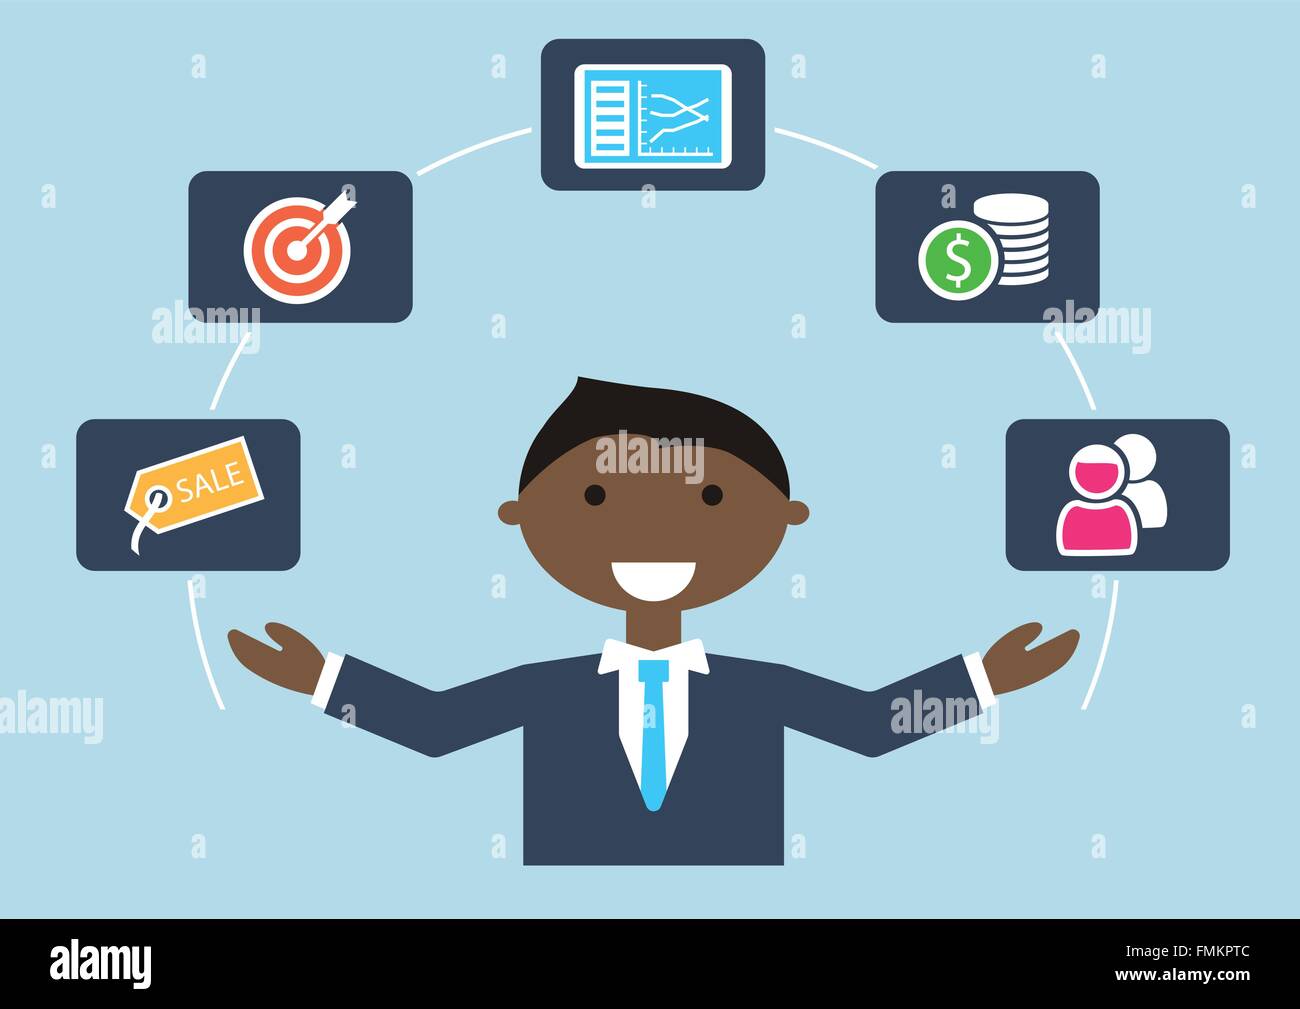 People at work: vector illustration of sales expert or sales manager Stock Vector